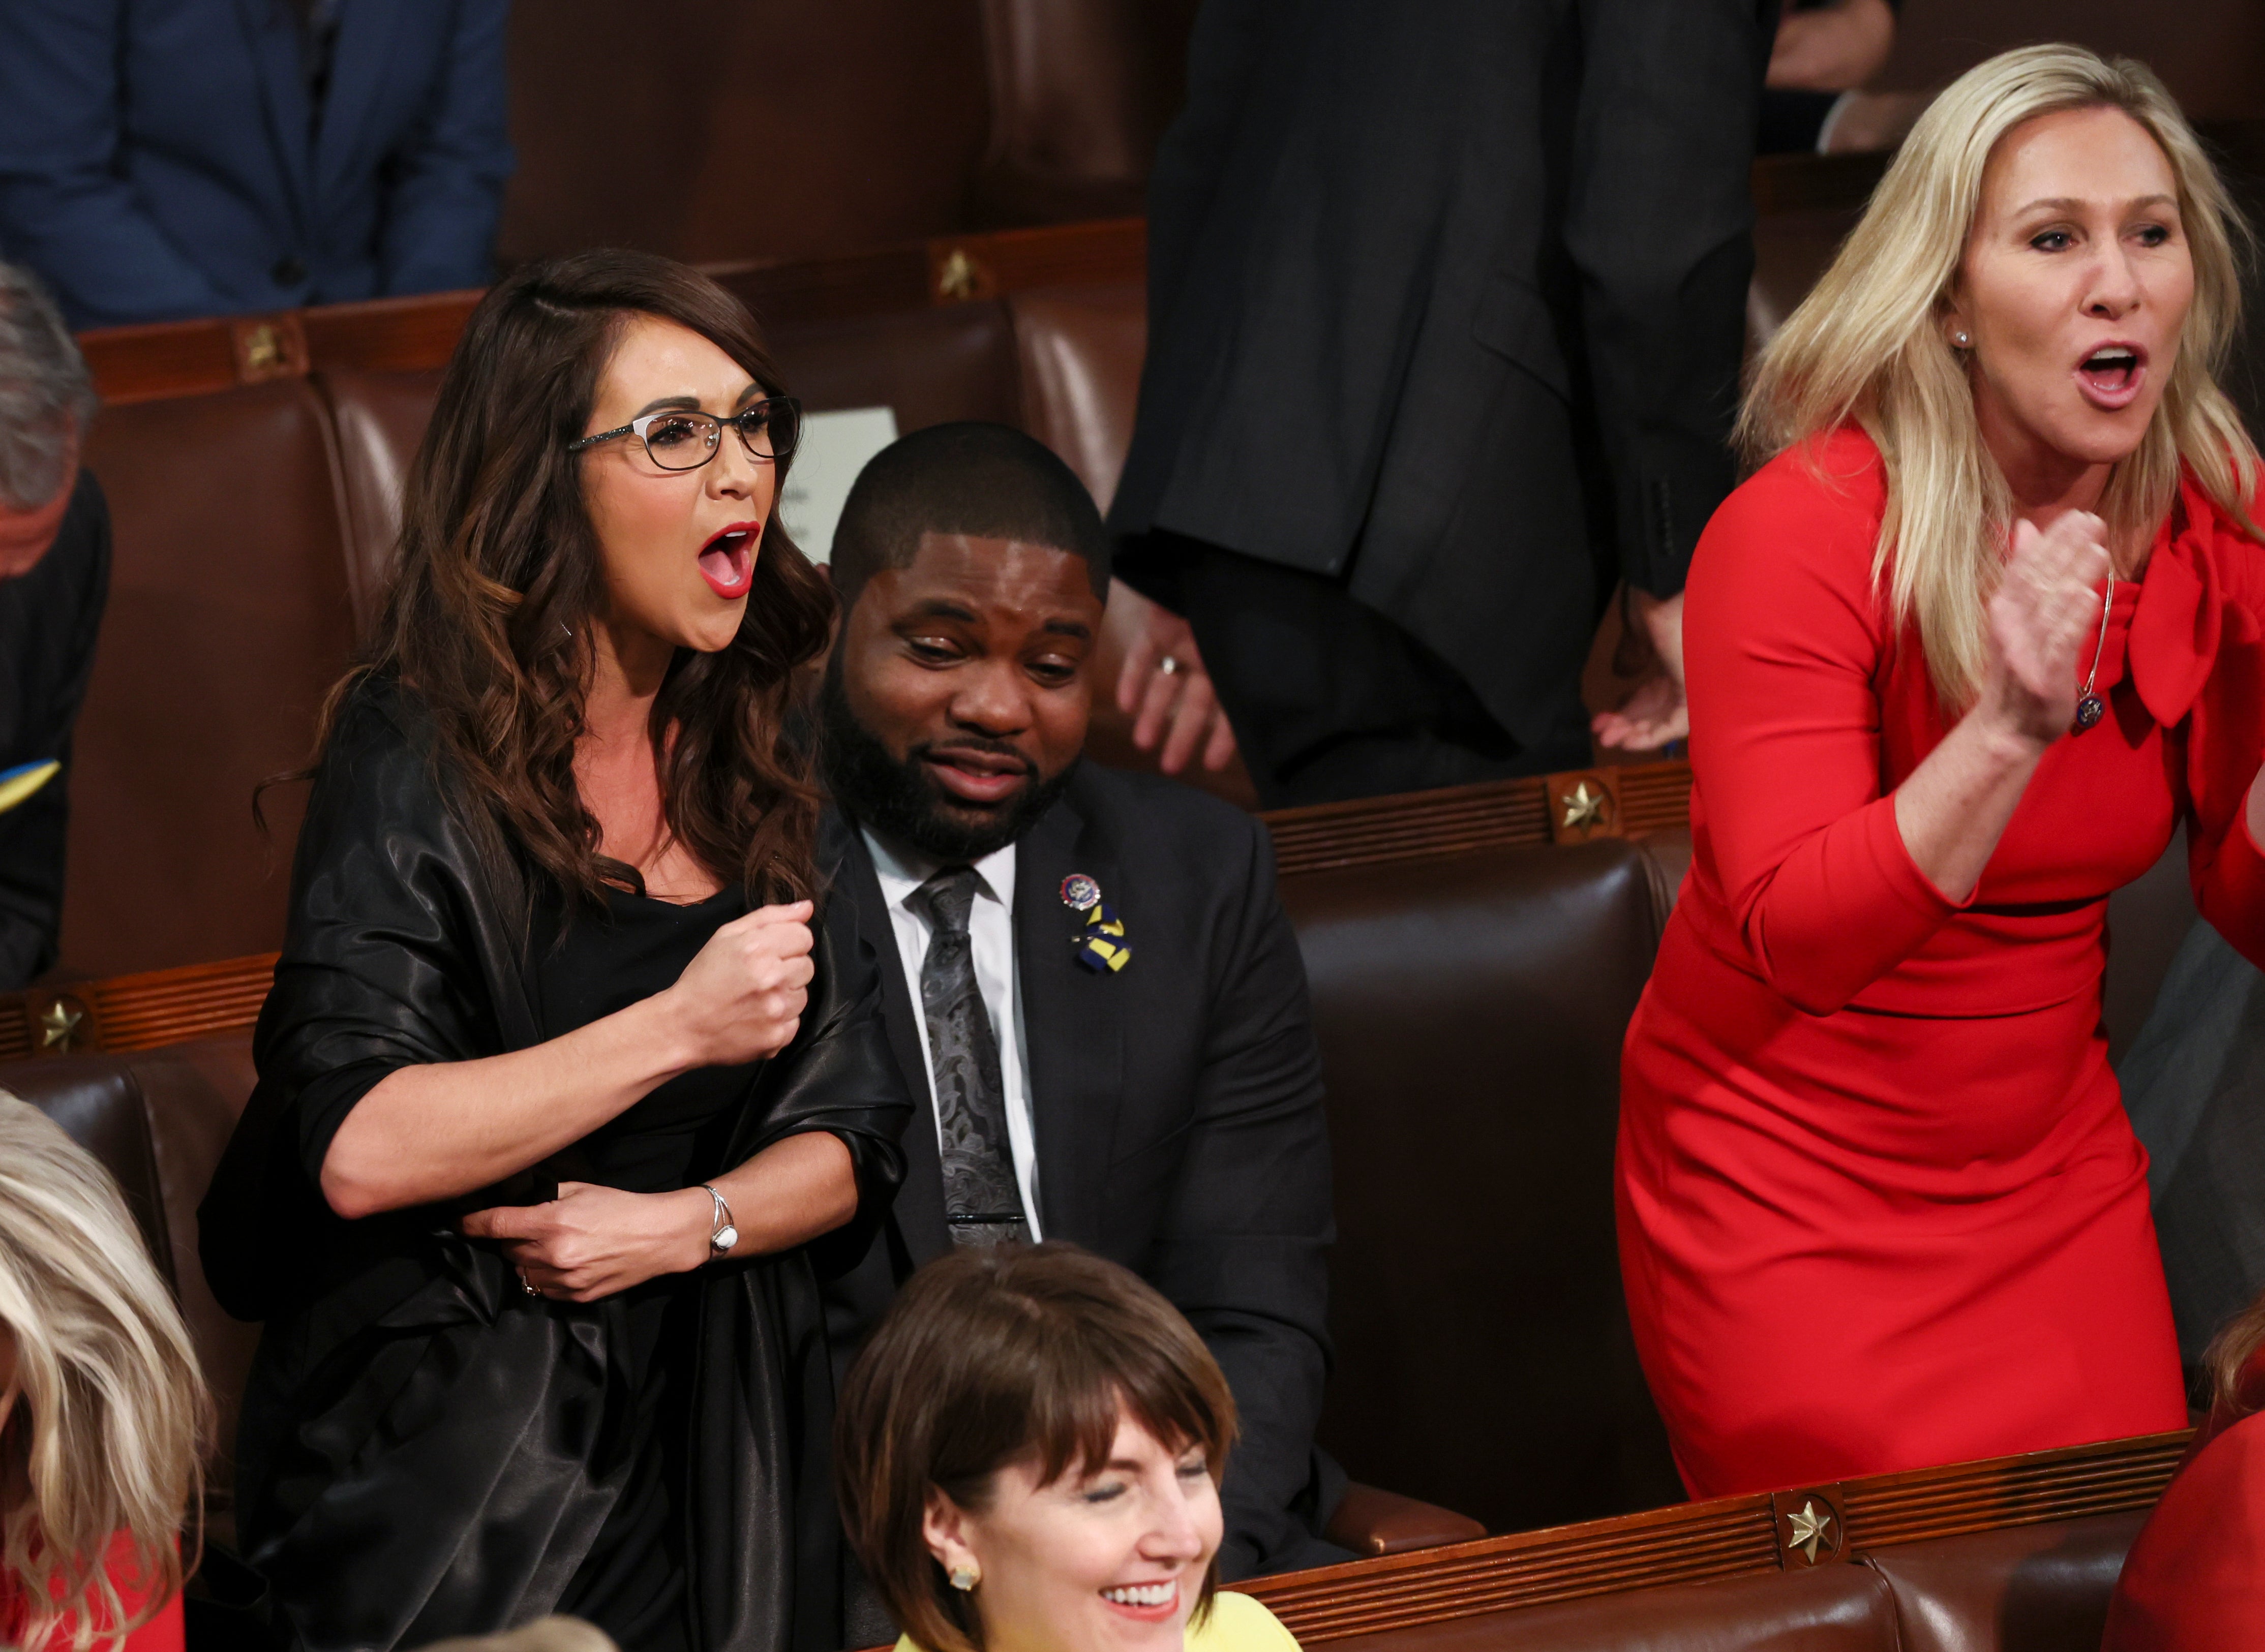 Rep. Lauren Boebert (R-CO) and Rep. Marjorie Taylor Greene (R-GA) scream "Build the Wall" as U.S. President Joe Biden delivers the State of the Union address